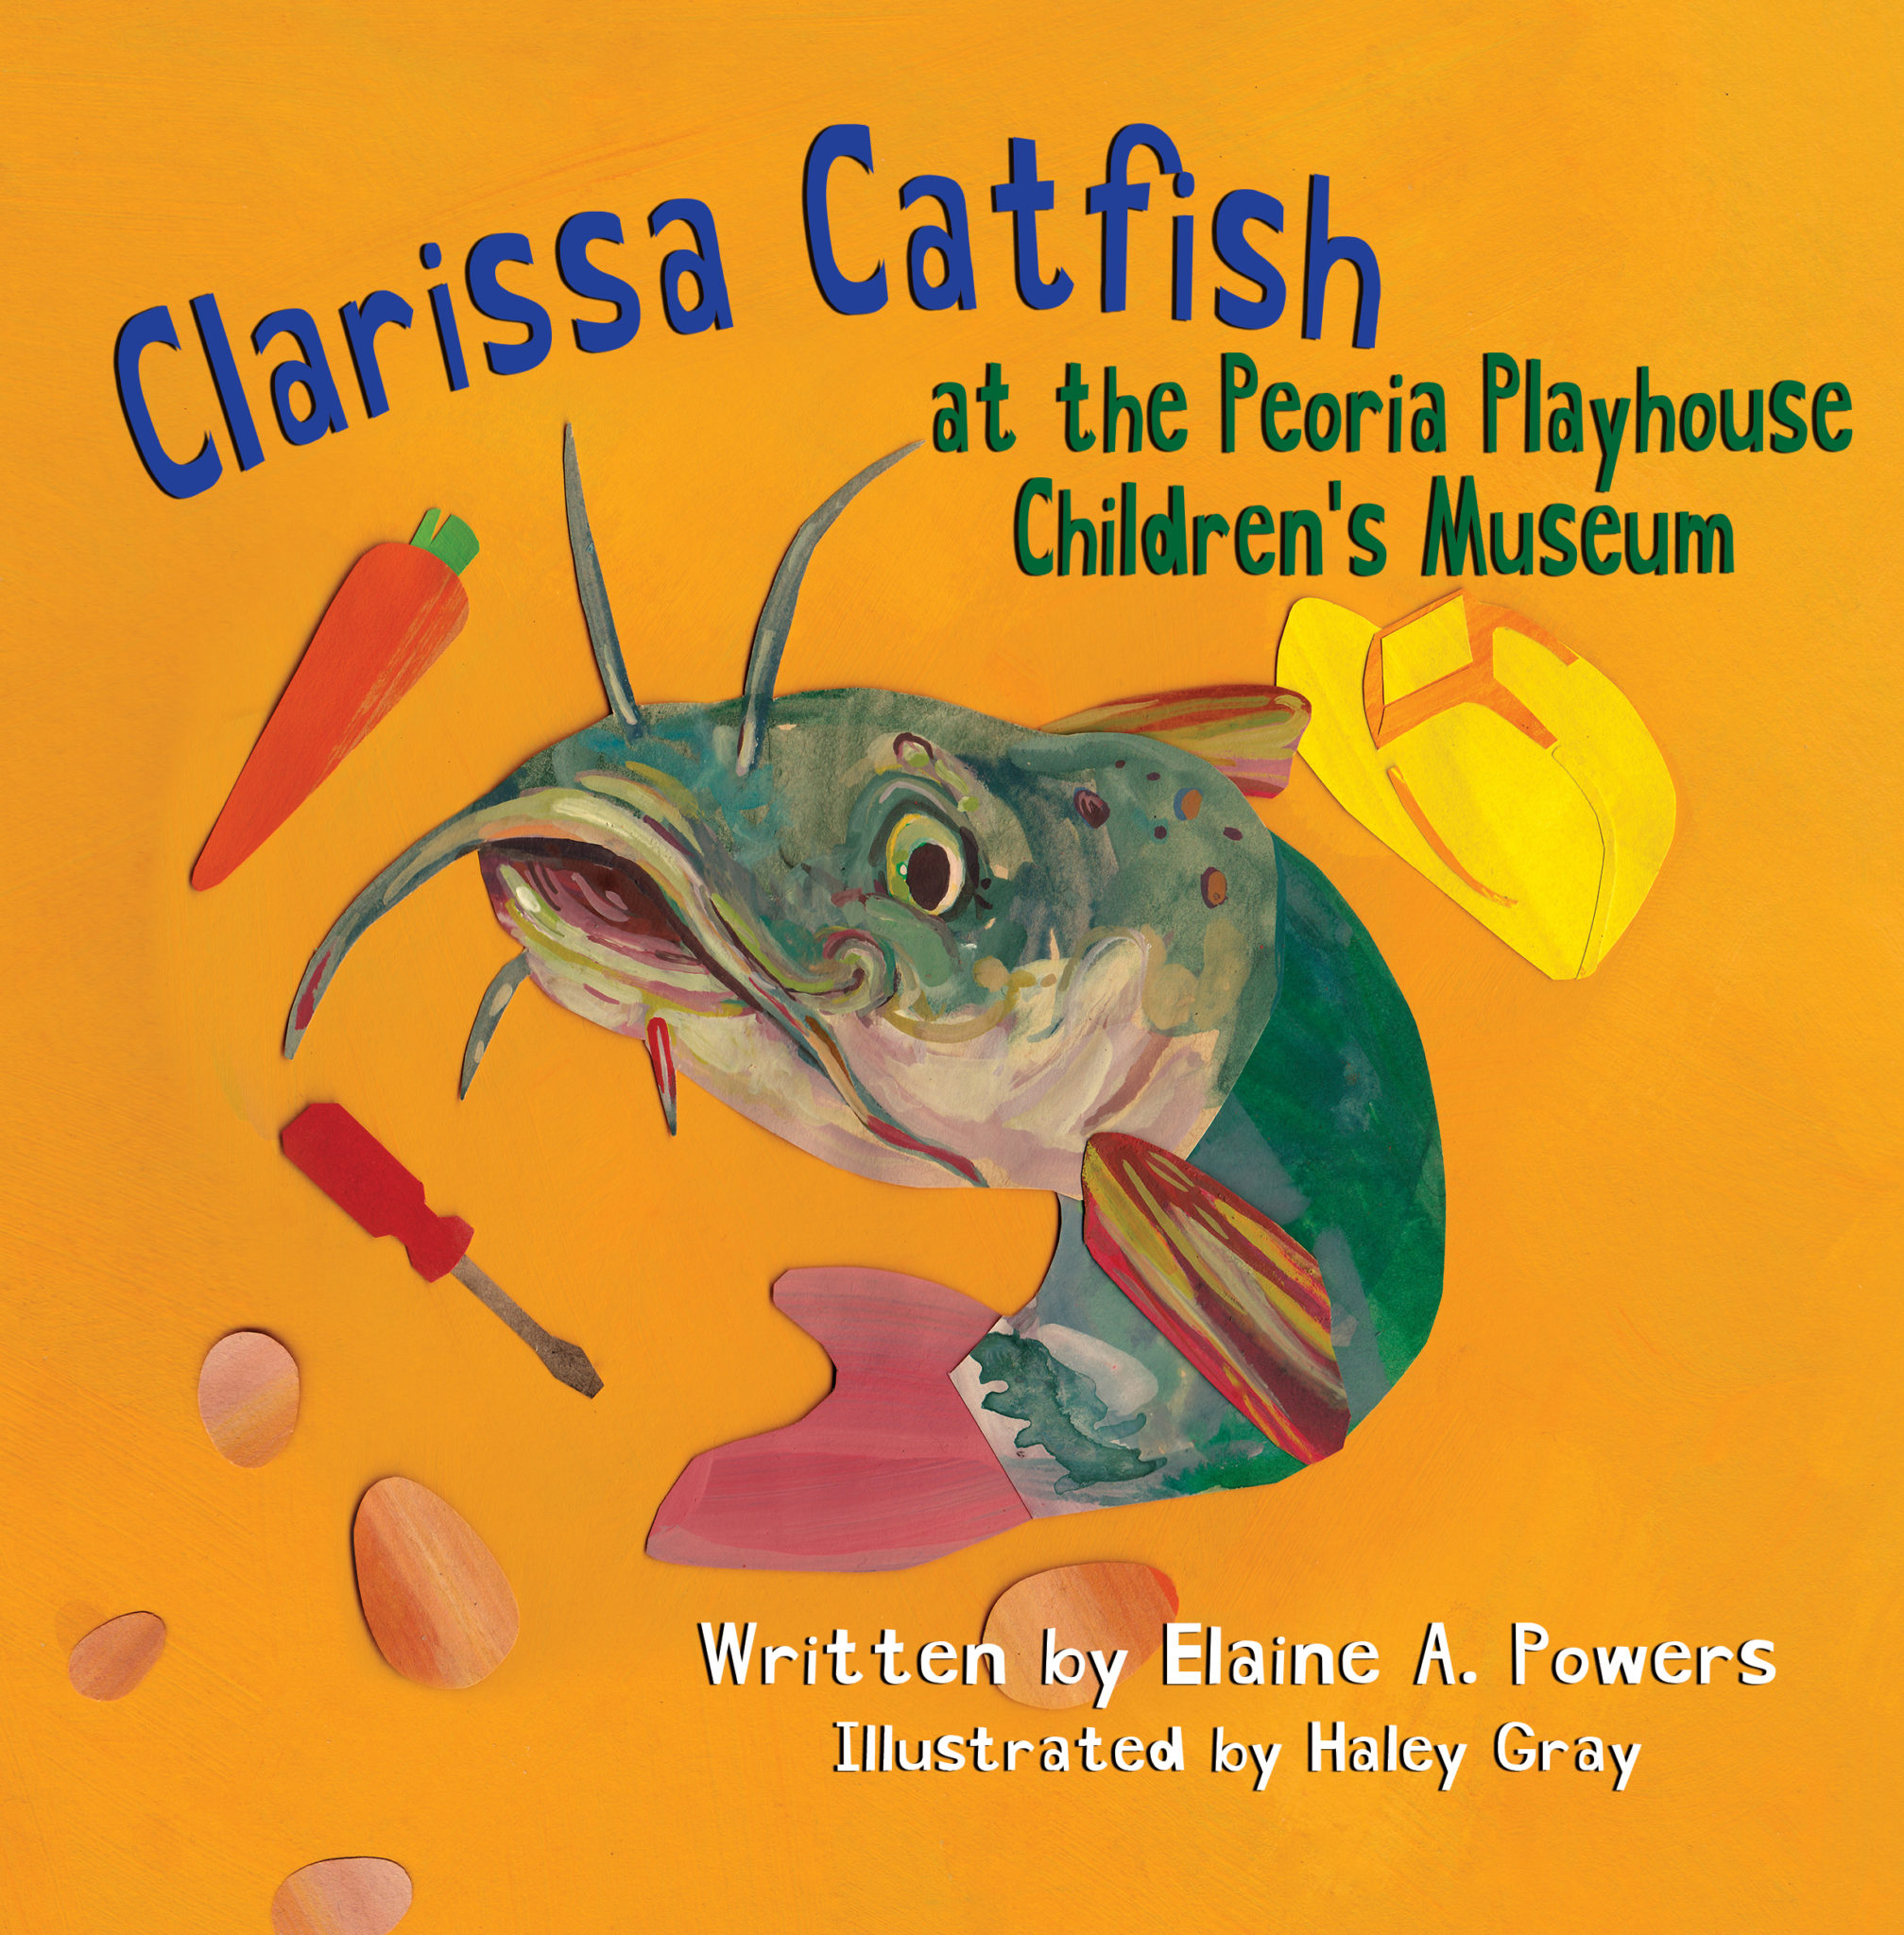 A golden orange book cover with a green catfish on the cover